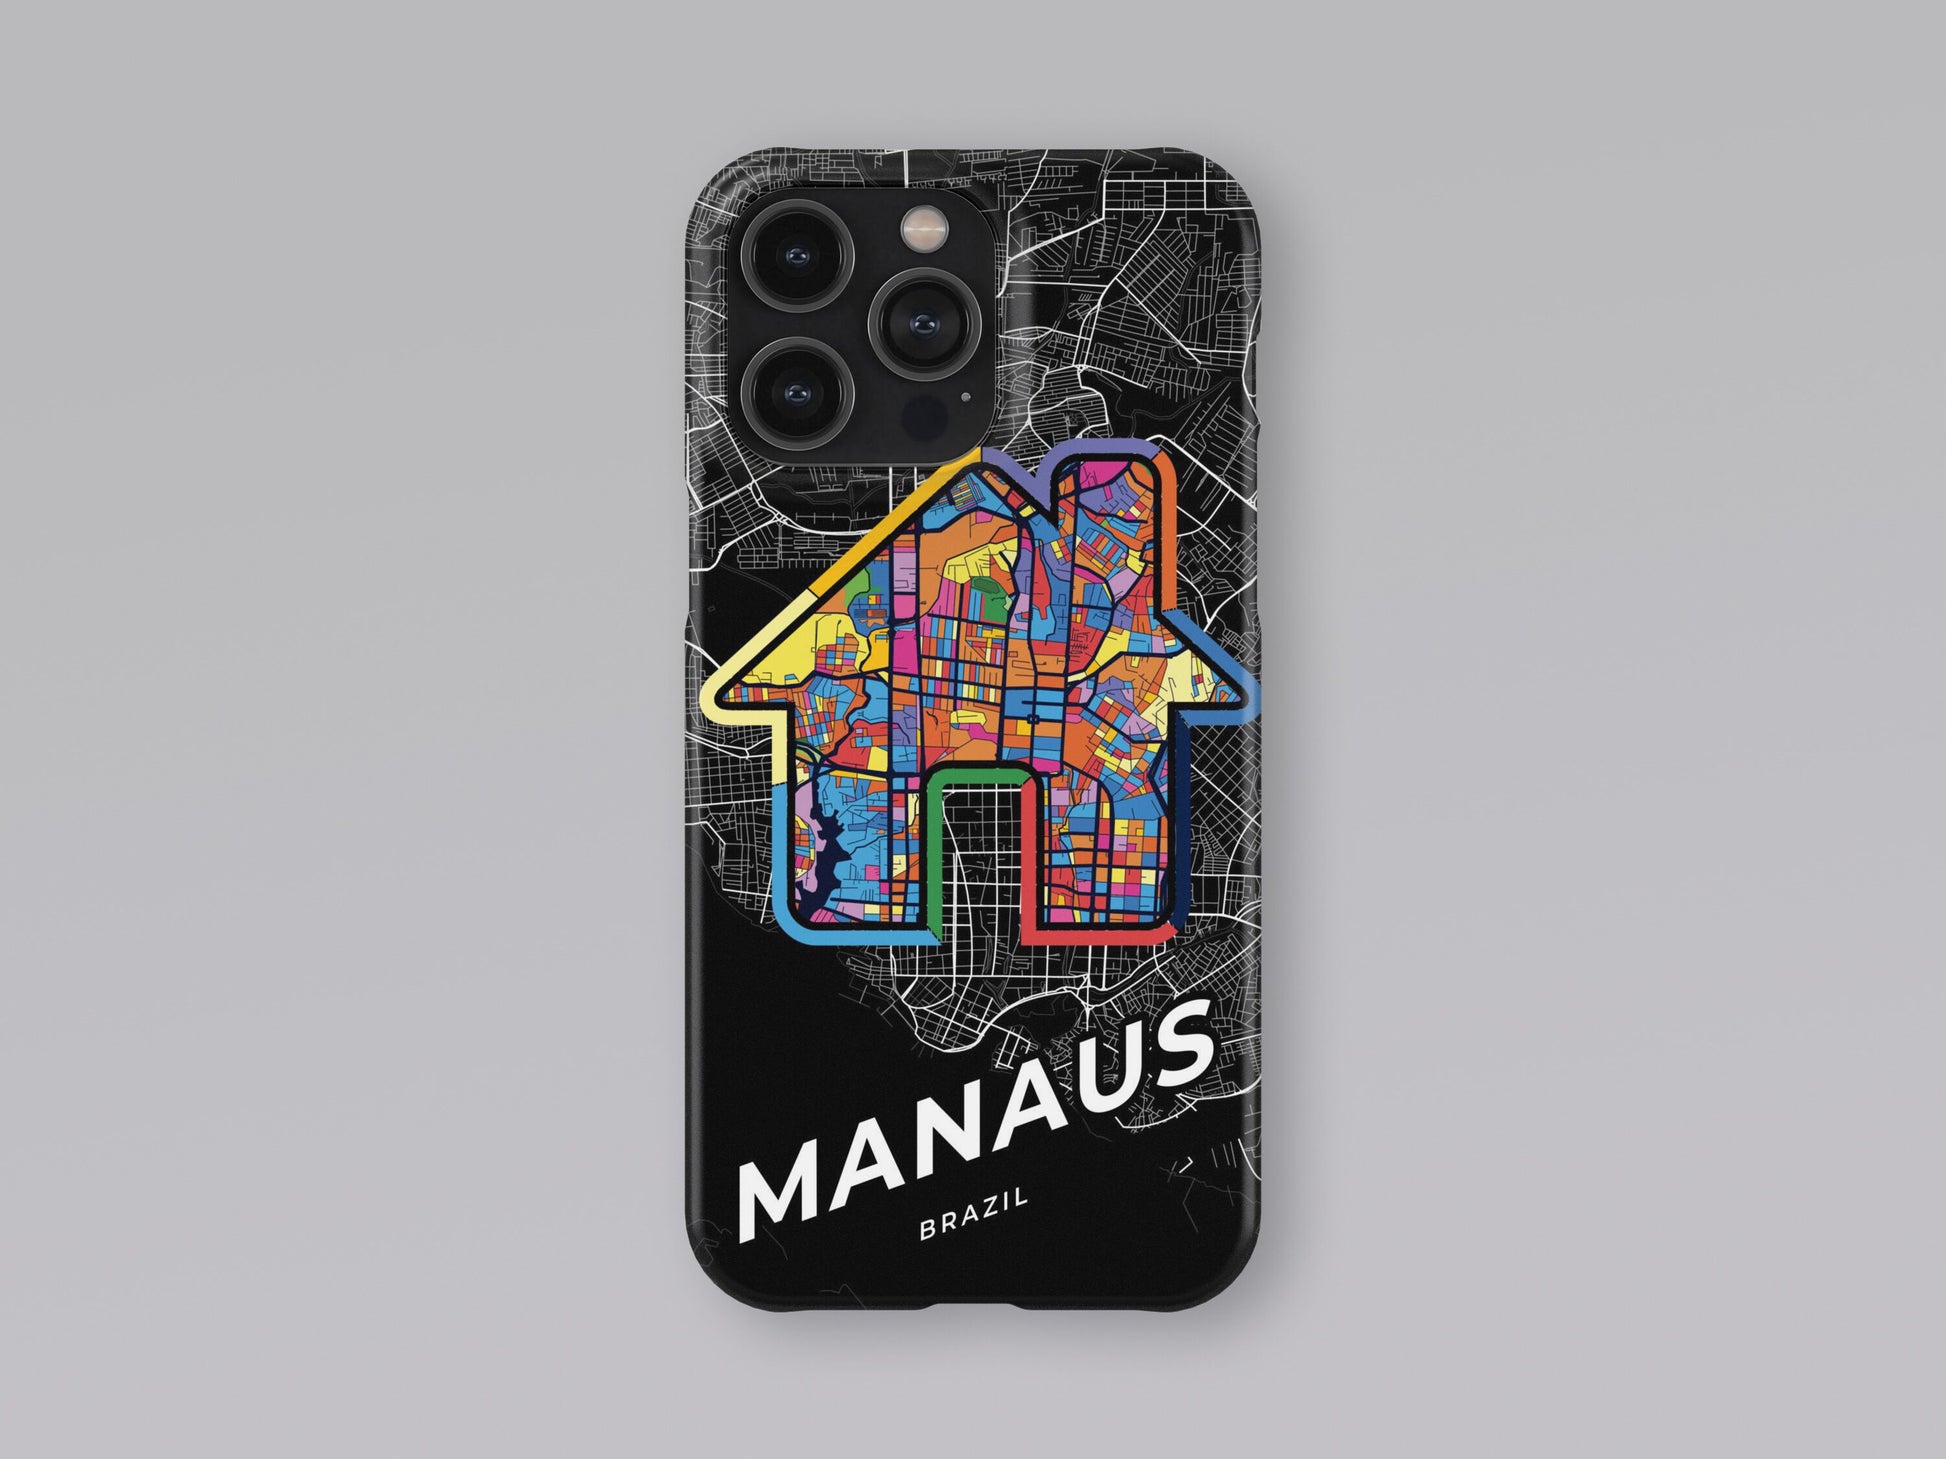 Manaus Brazil slim phone case with colorful icon. Birthday, wedding or housewarming gift. Couple match cases. 3